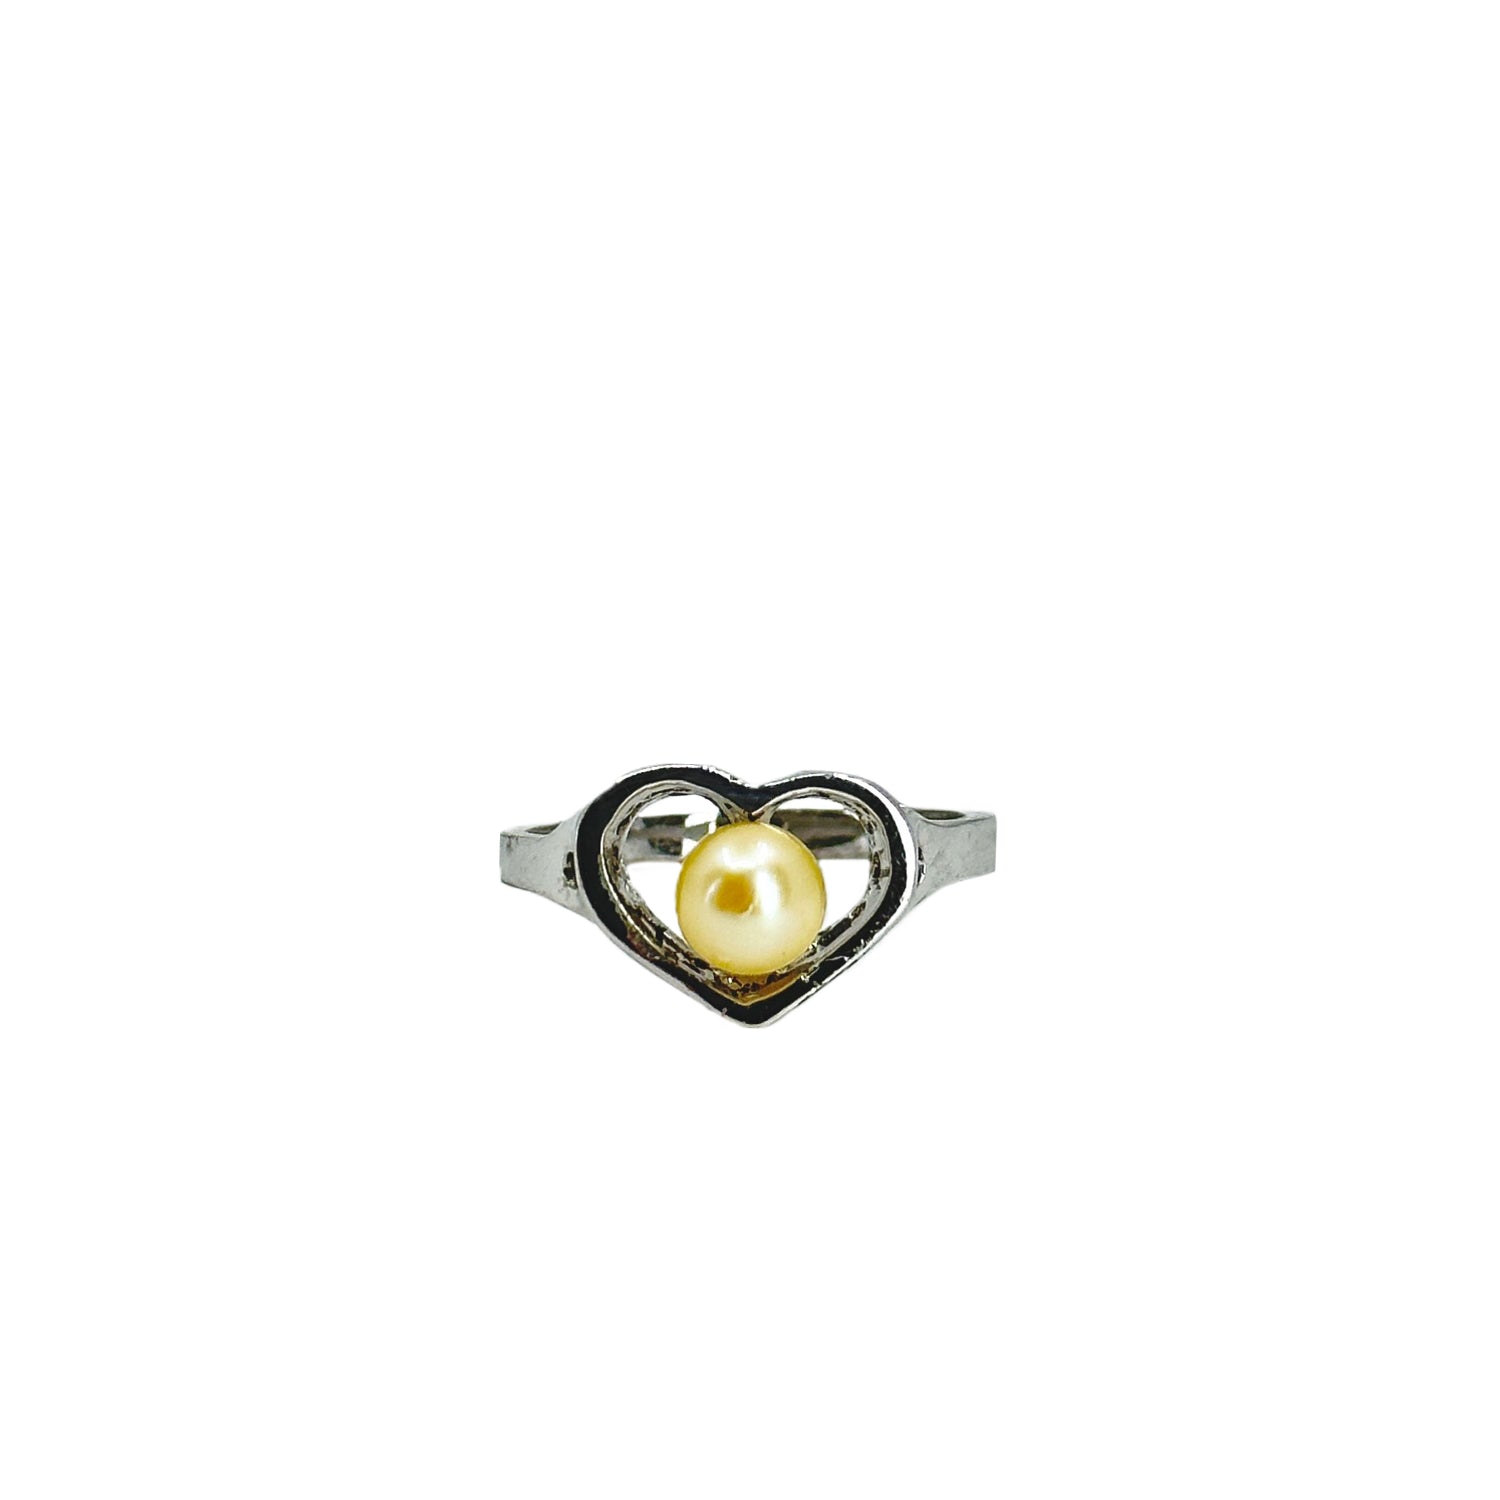 Heart Vintage Cream Golden Japanese Saltwater Akoya Cultured Pearl Ring- Sterling Silver Sz 6